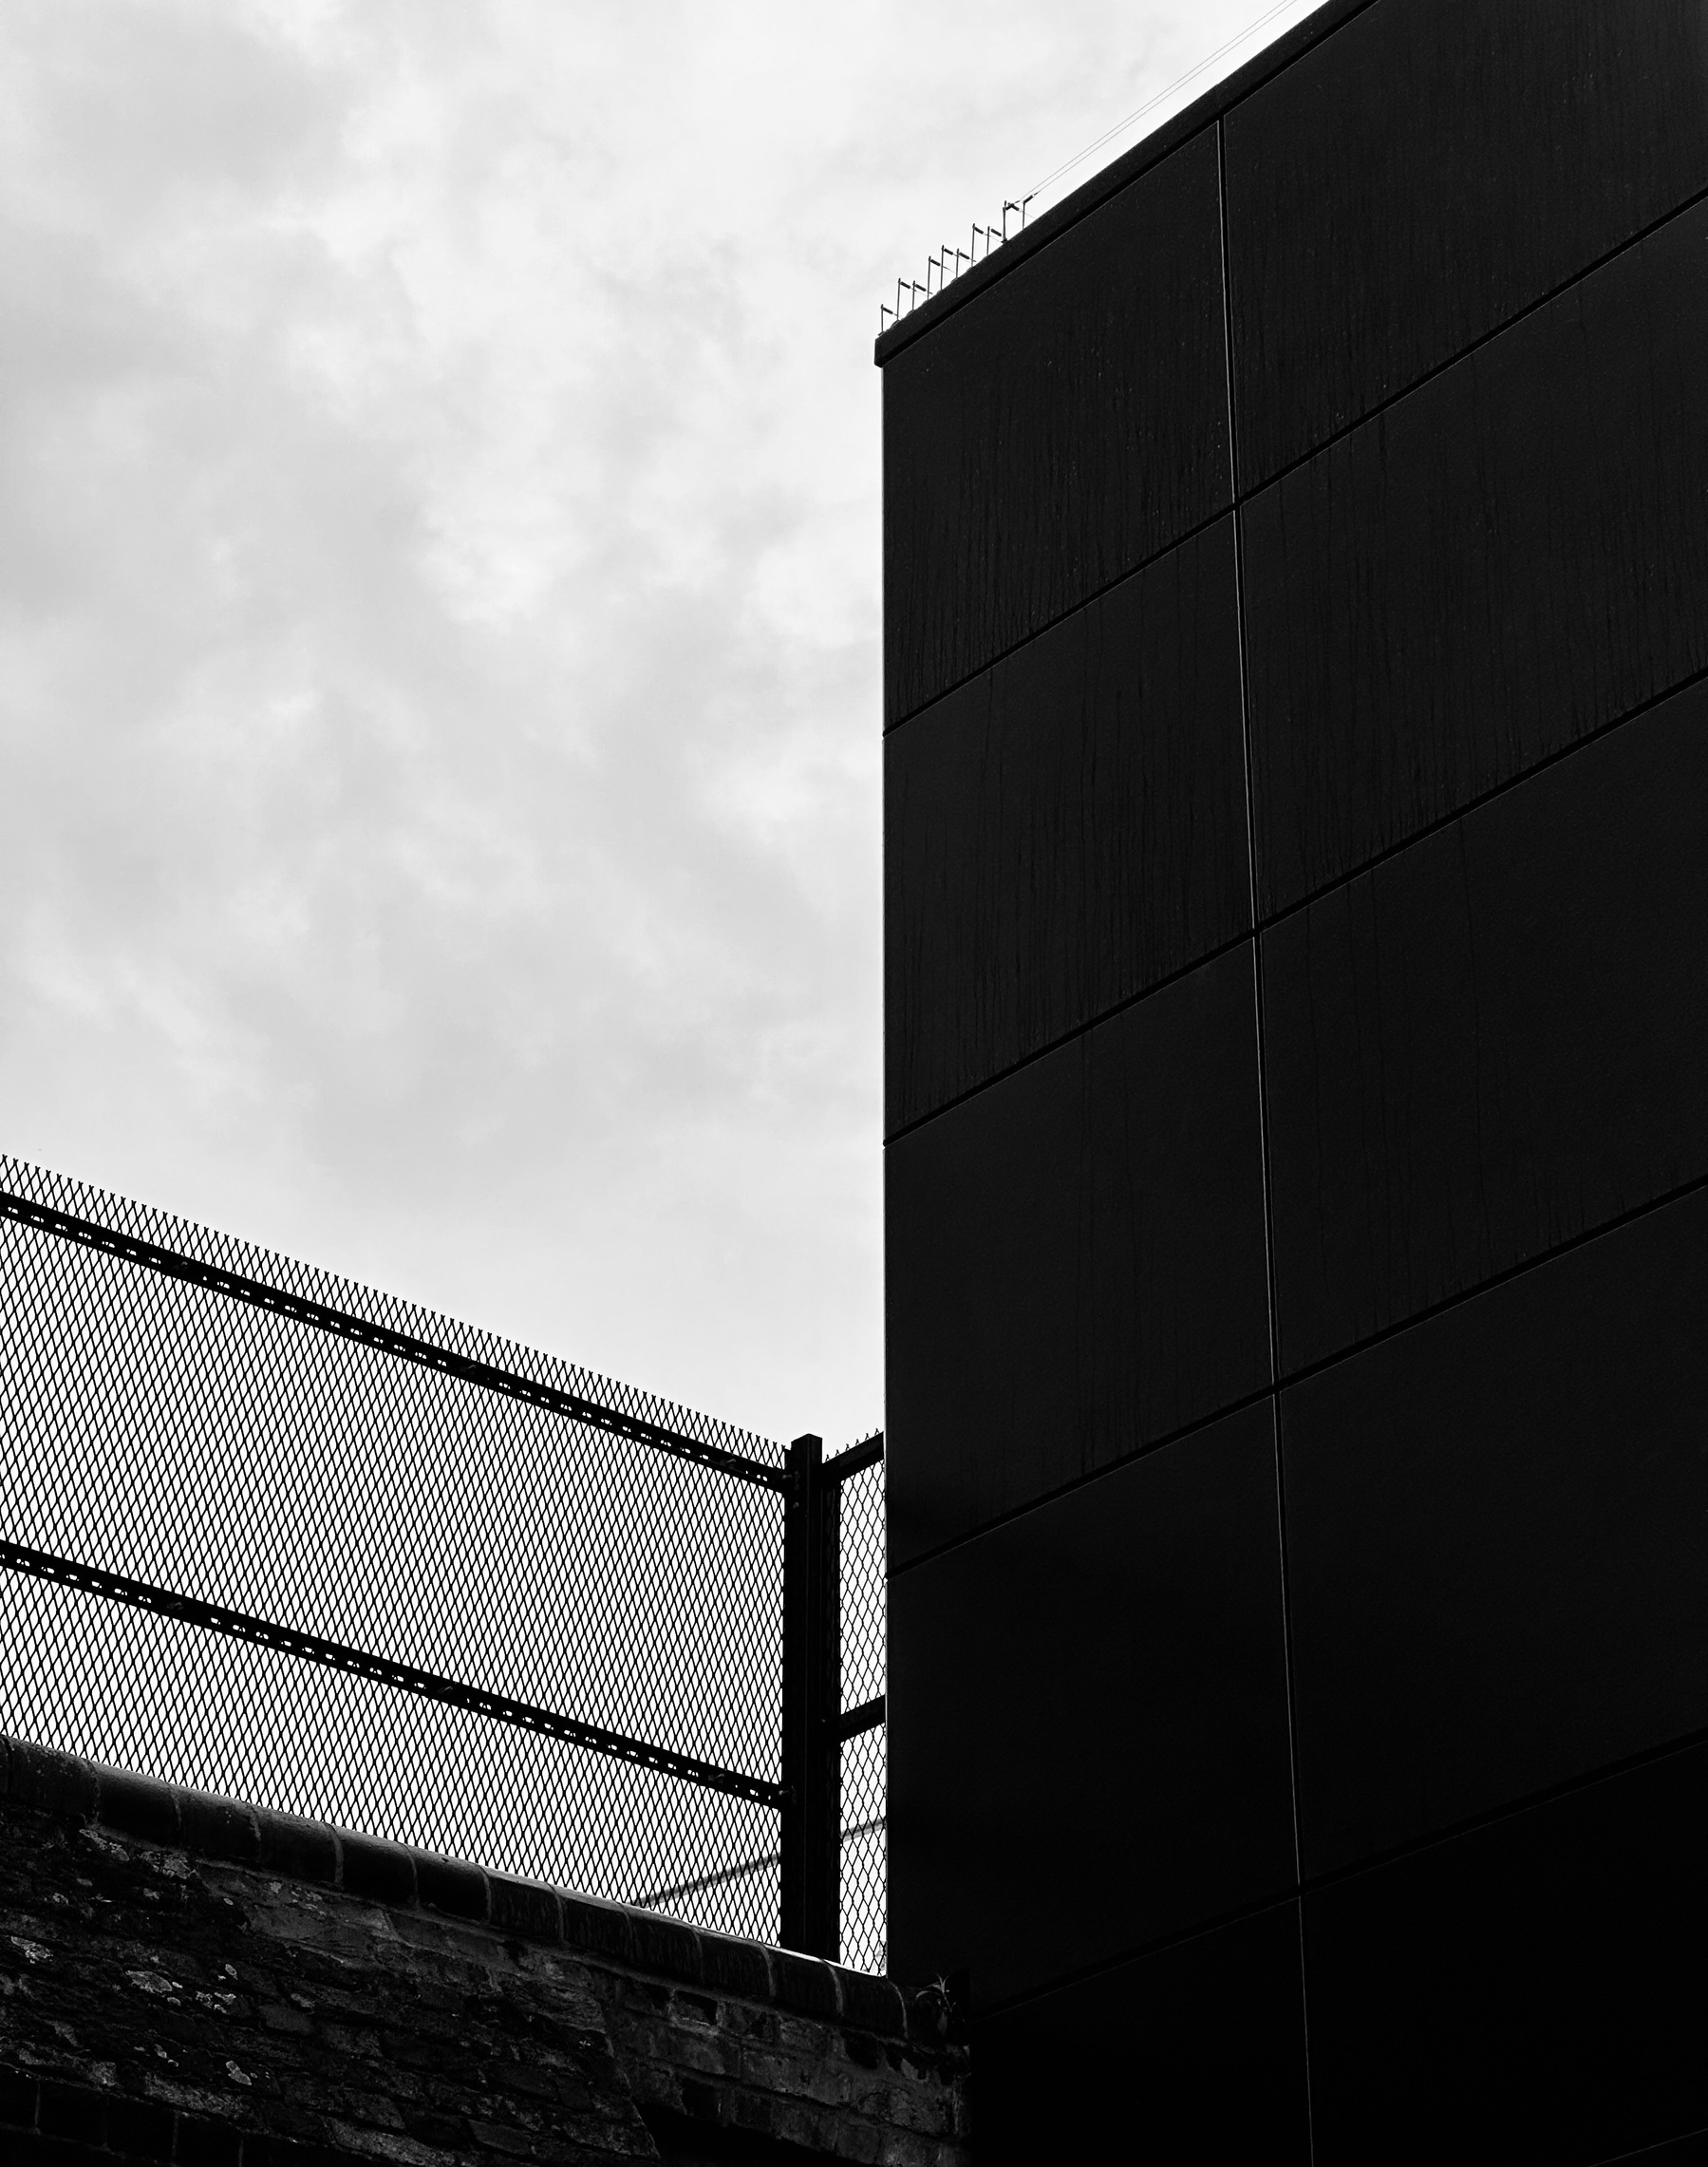 Two walls meeting at a right angle, one made of brick and one made of black panels. A grey sky above.